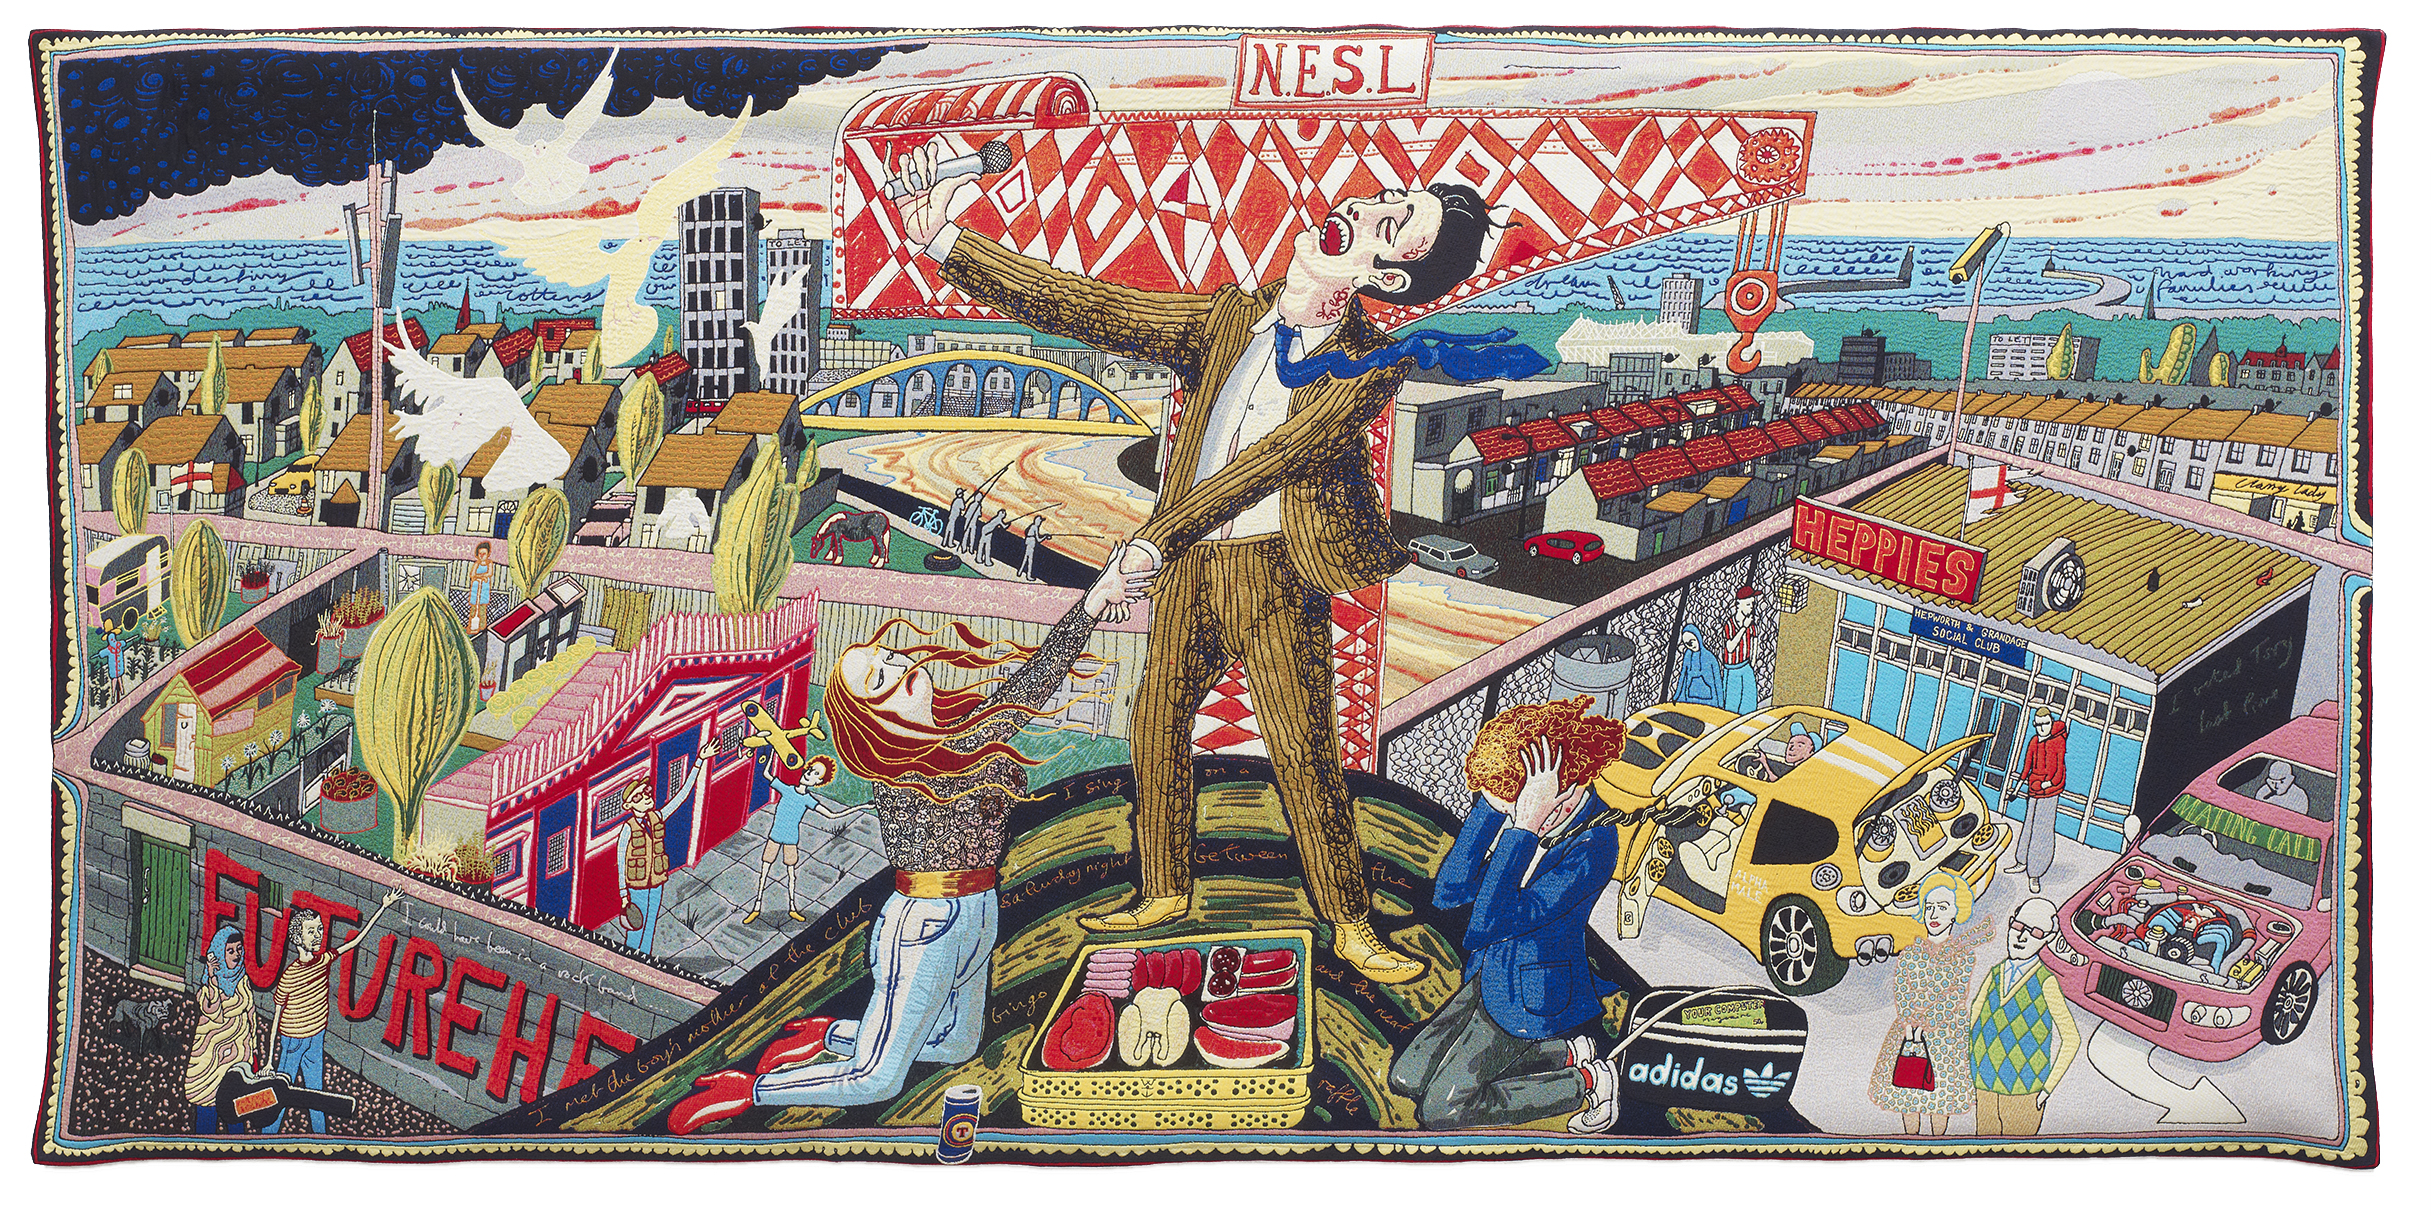 A collage by the multi-award-winning artist Grayson Perry.